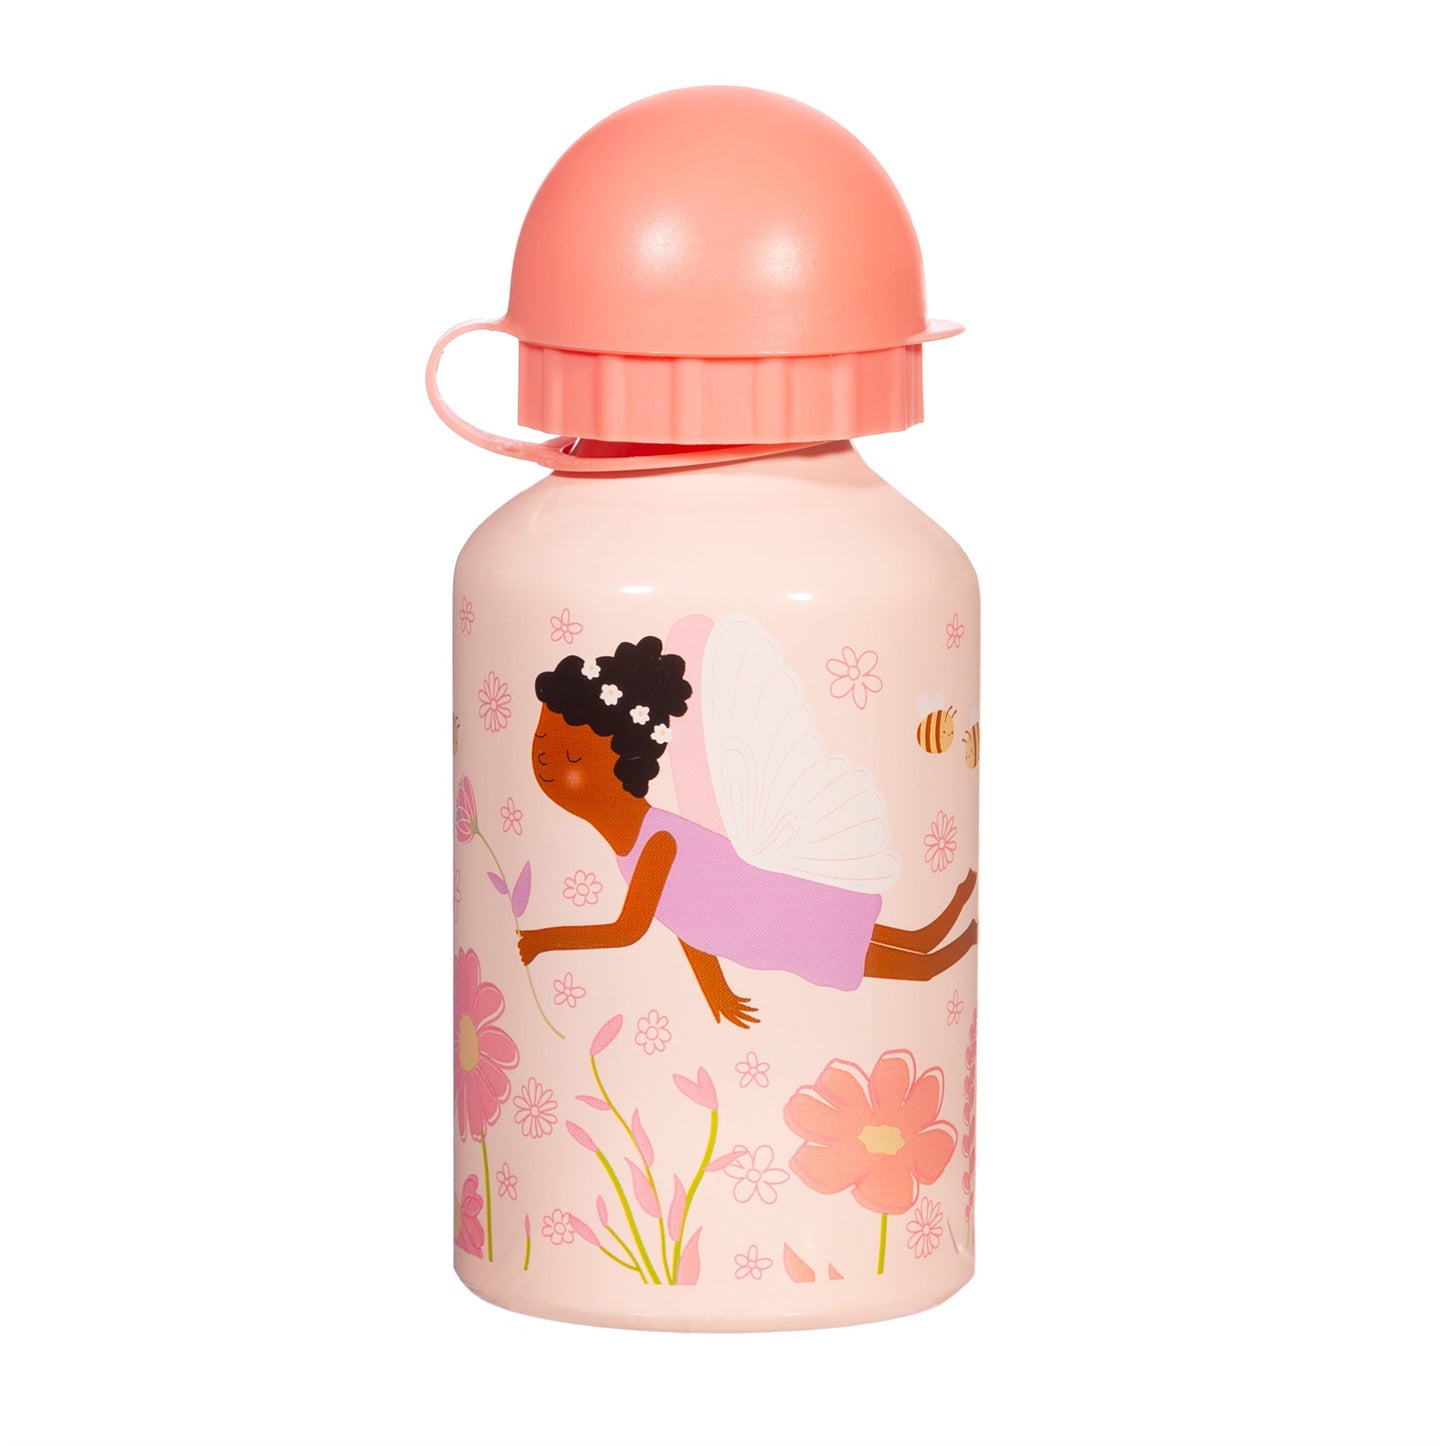 Fairy Metal Water Bottle by Sass and Belle